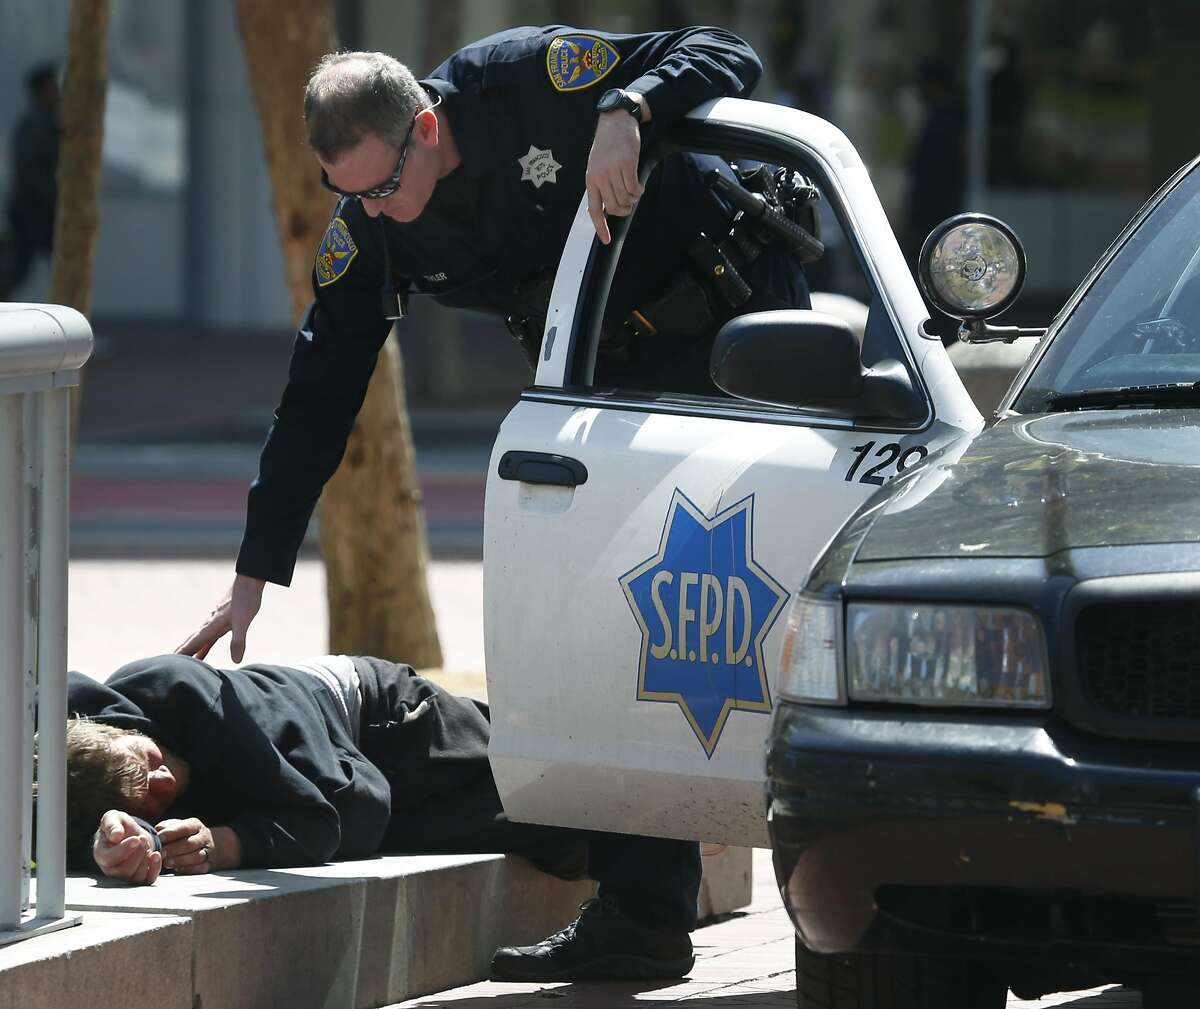 A police officer checks on the well being of a man lying down at United Nations Plaza in San Francisco, Calif. on Thursday, April 20, 2017. The city may soon become the first in the United States to open a safe injection site for intravenous drug users.